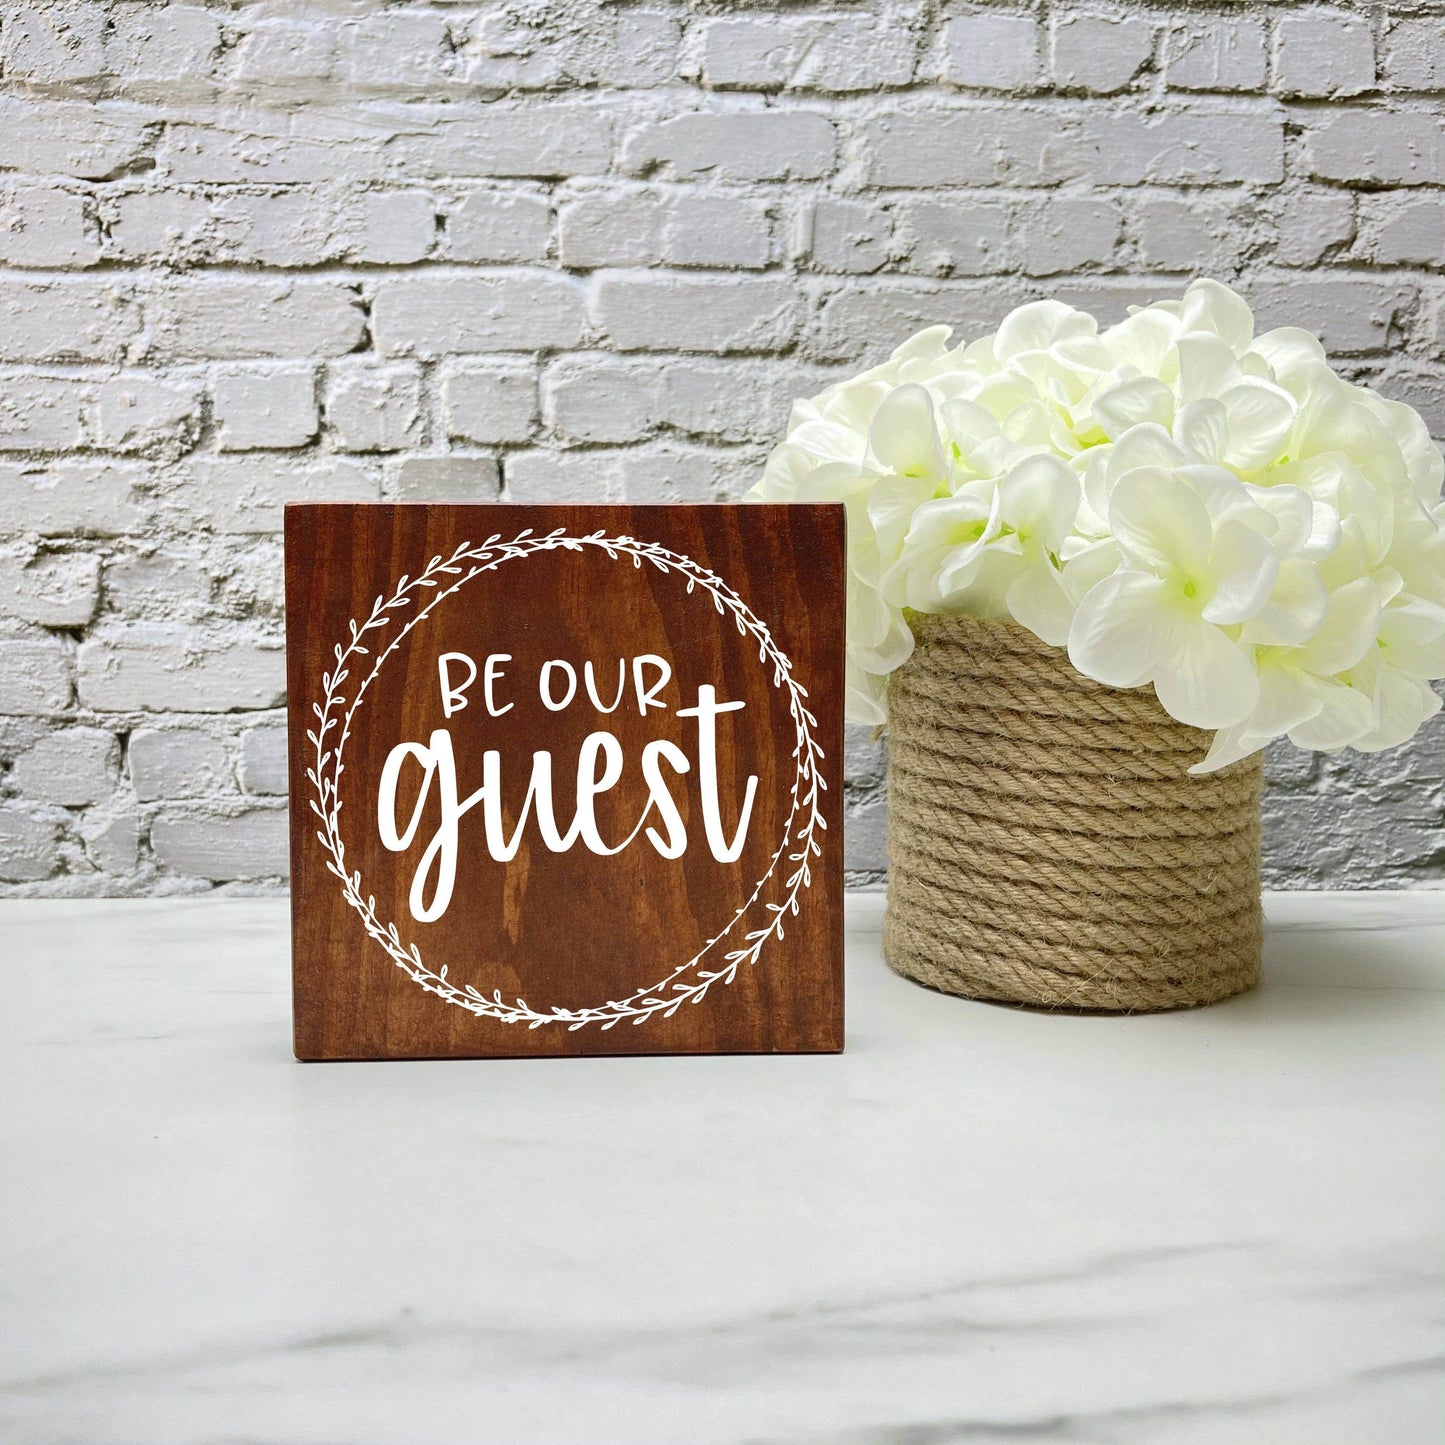 Be Our Guest, kitchen wood sign, kitchen decor, home decor